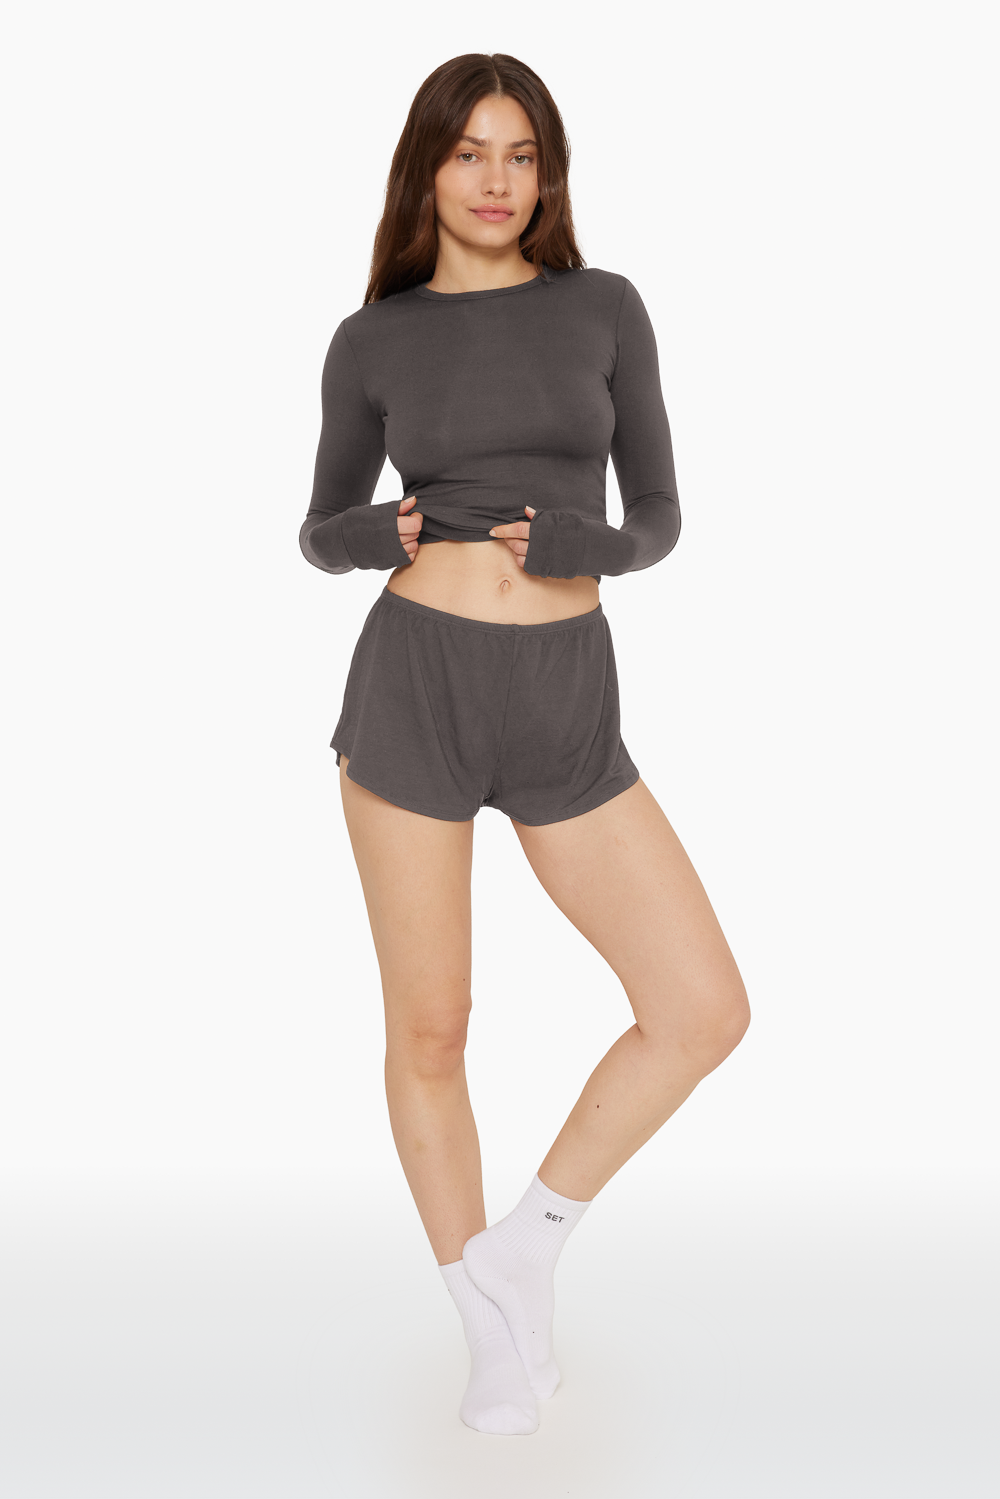 SET™ SLEEP JERSEY RELAXED SLEEP SHORTS IN GRAPHITE